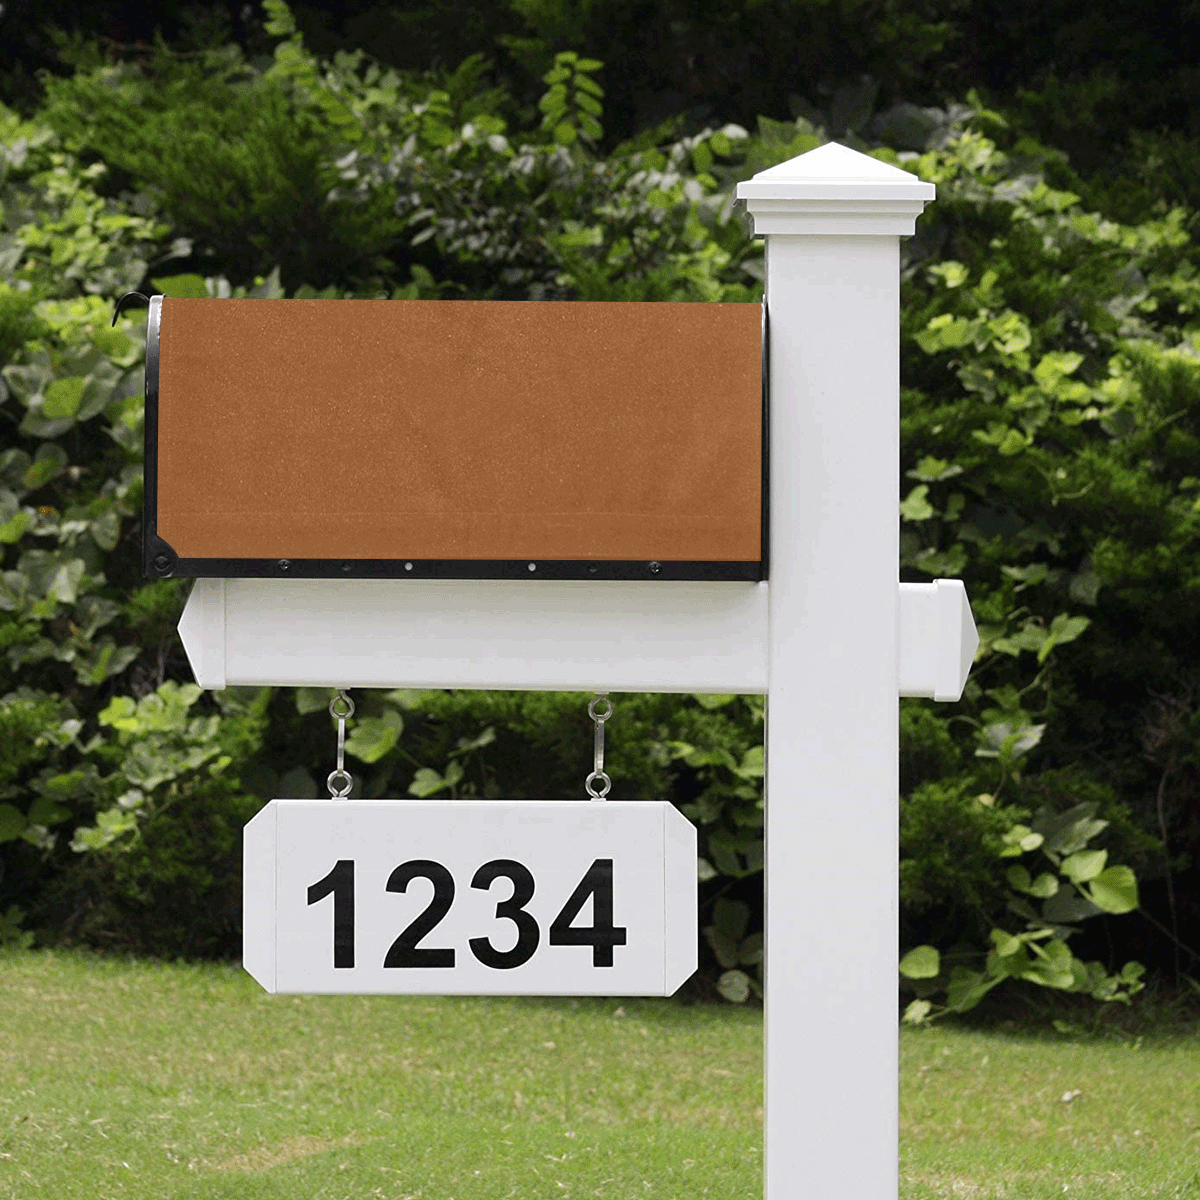 color saddle brown Mailbox Cover